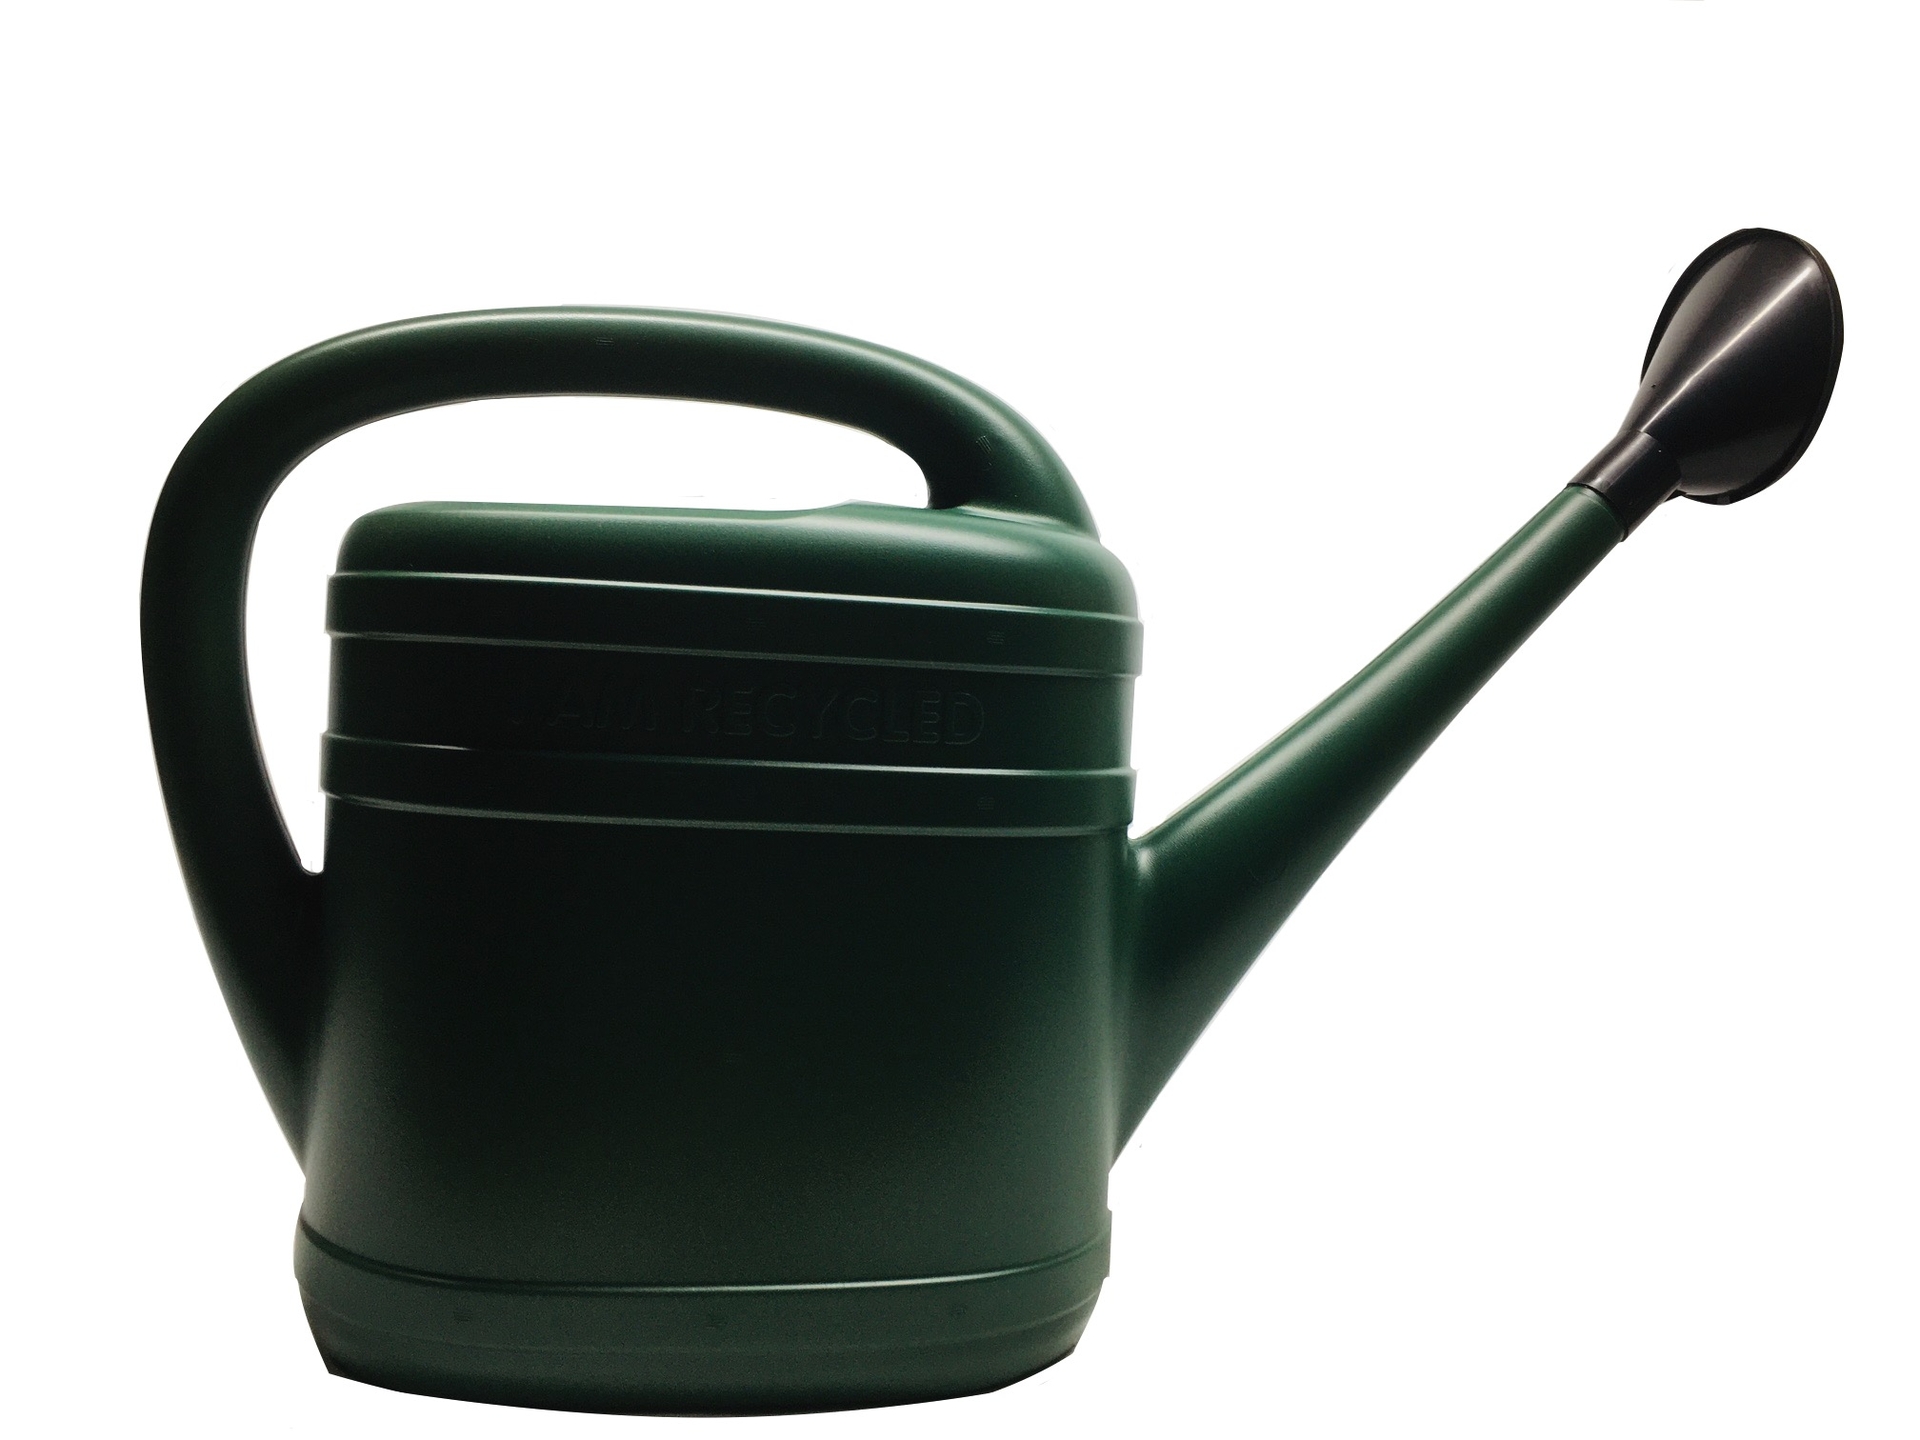 Watering can with spray head 10 Green - Sustainable lifestyle